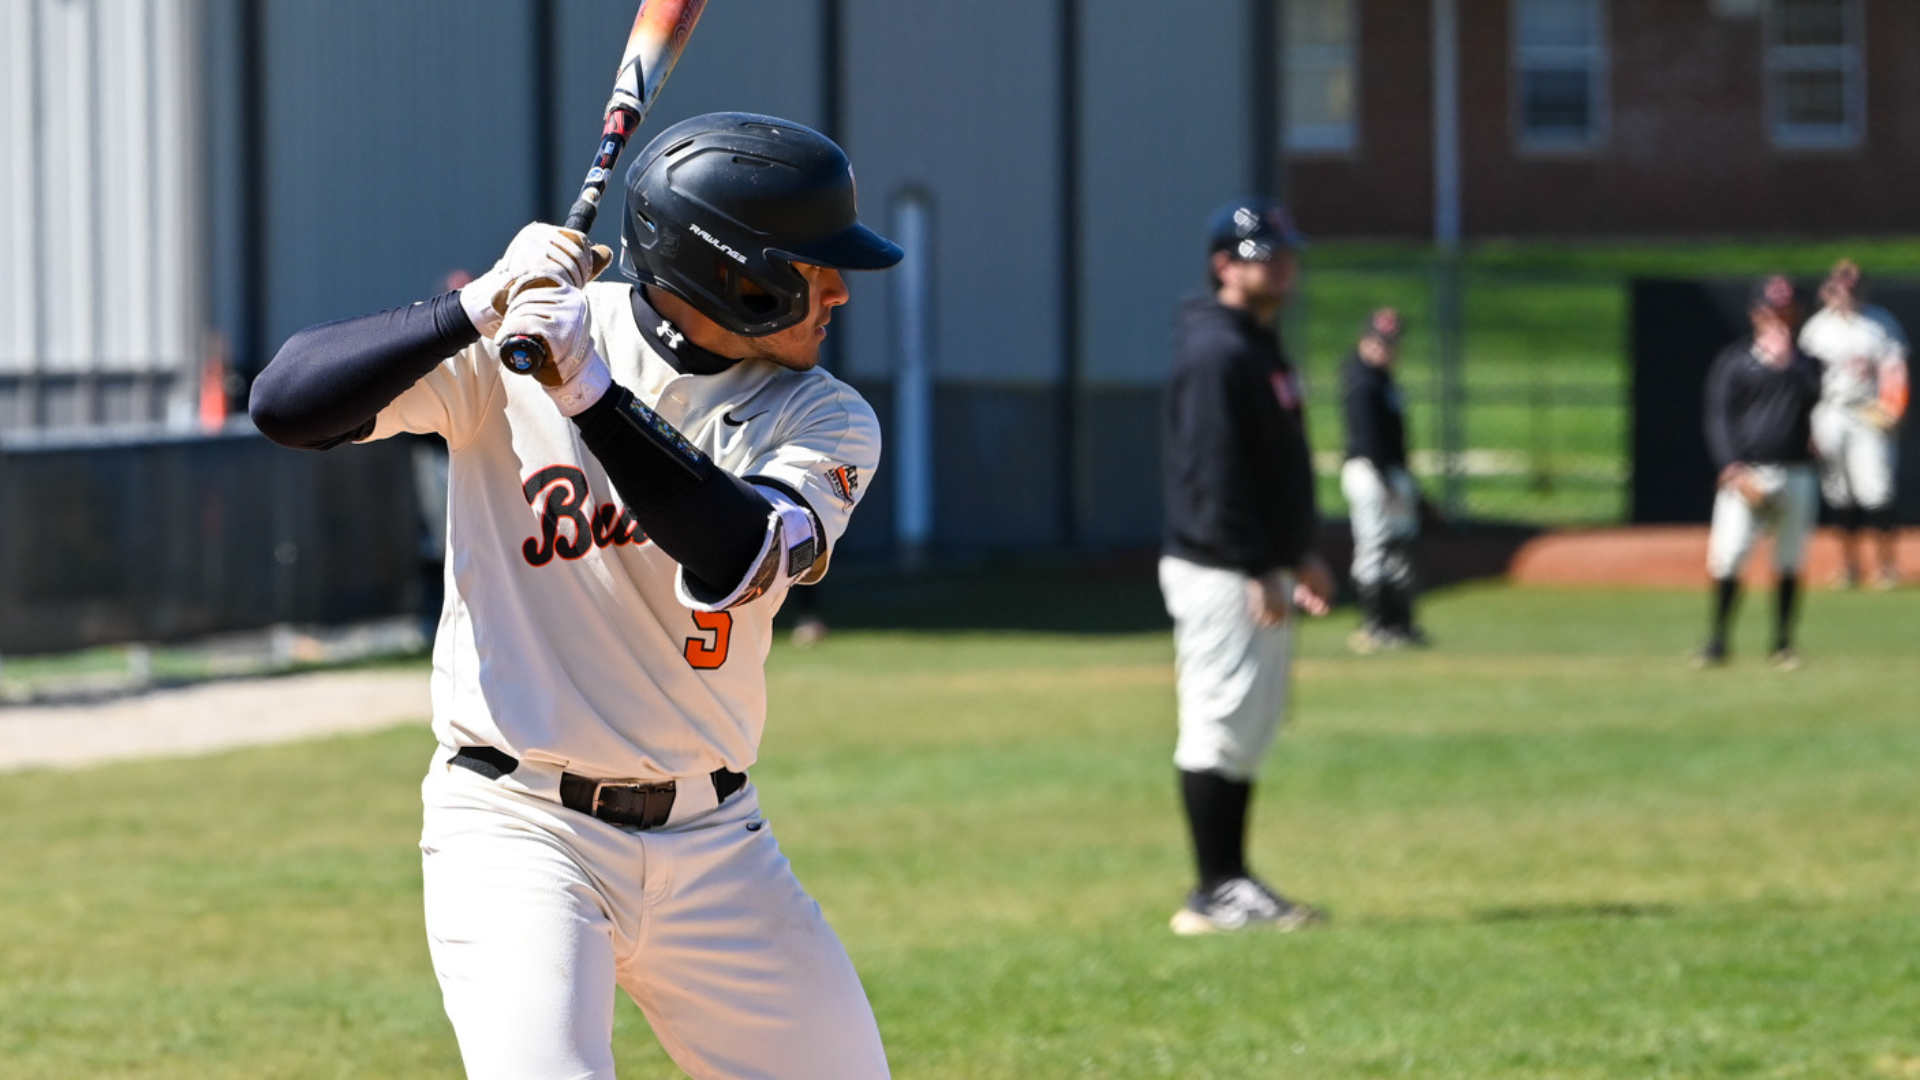 Union hits five home runs in one game, but fall in doubleheader to No. 17 Tennessee Wesleyan